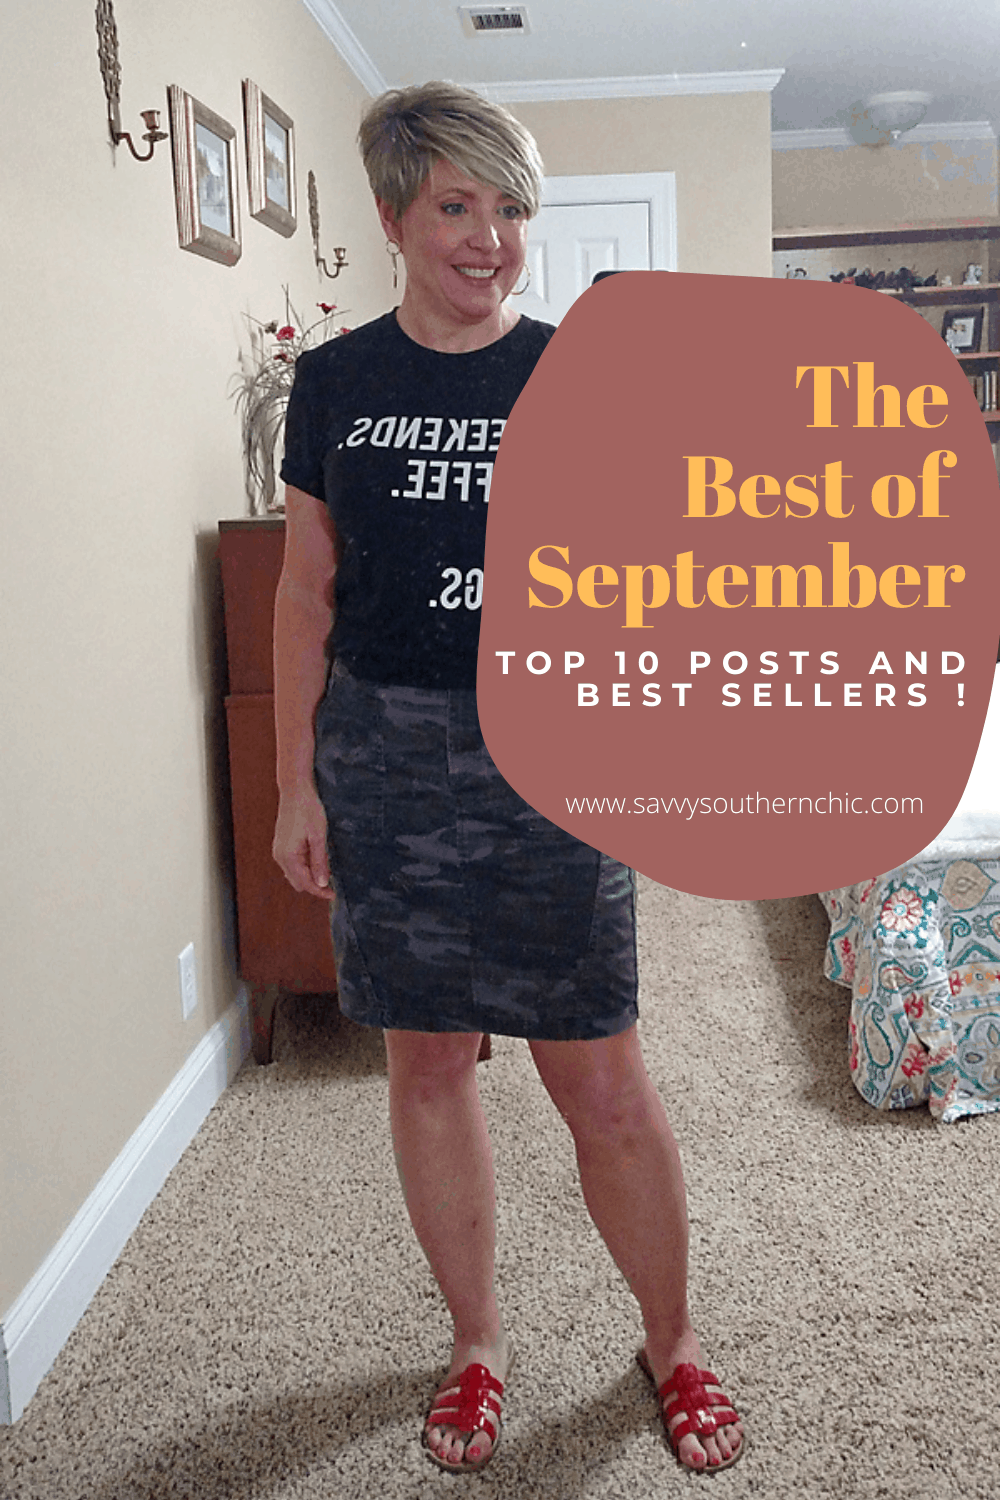 The top 10 favorite post and products of September